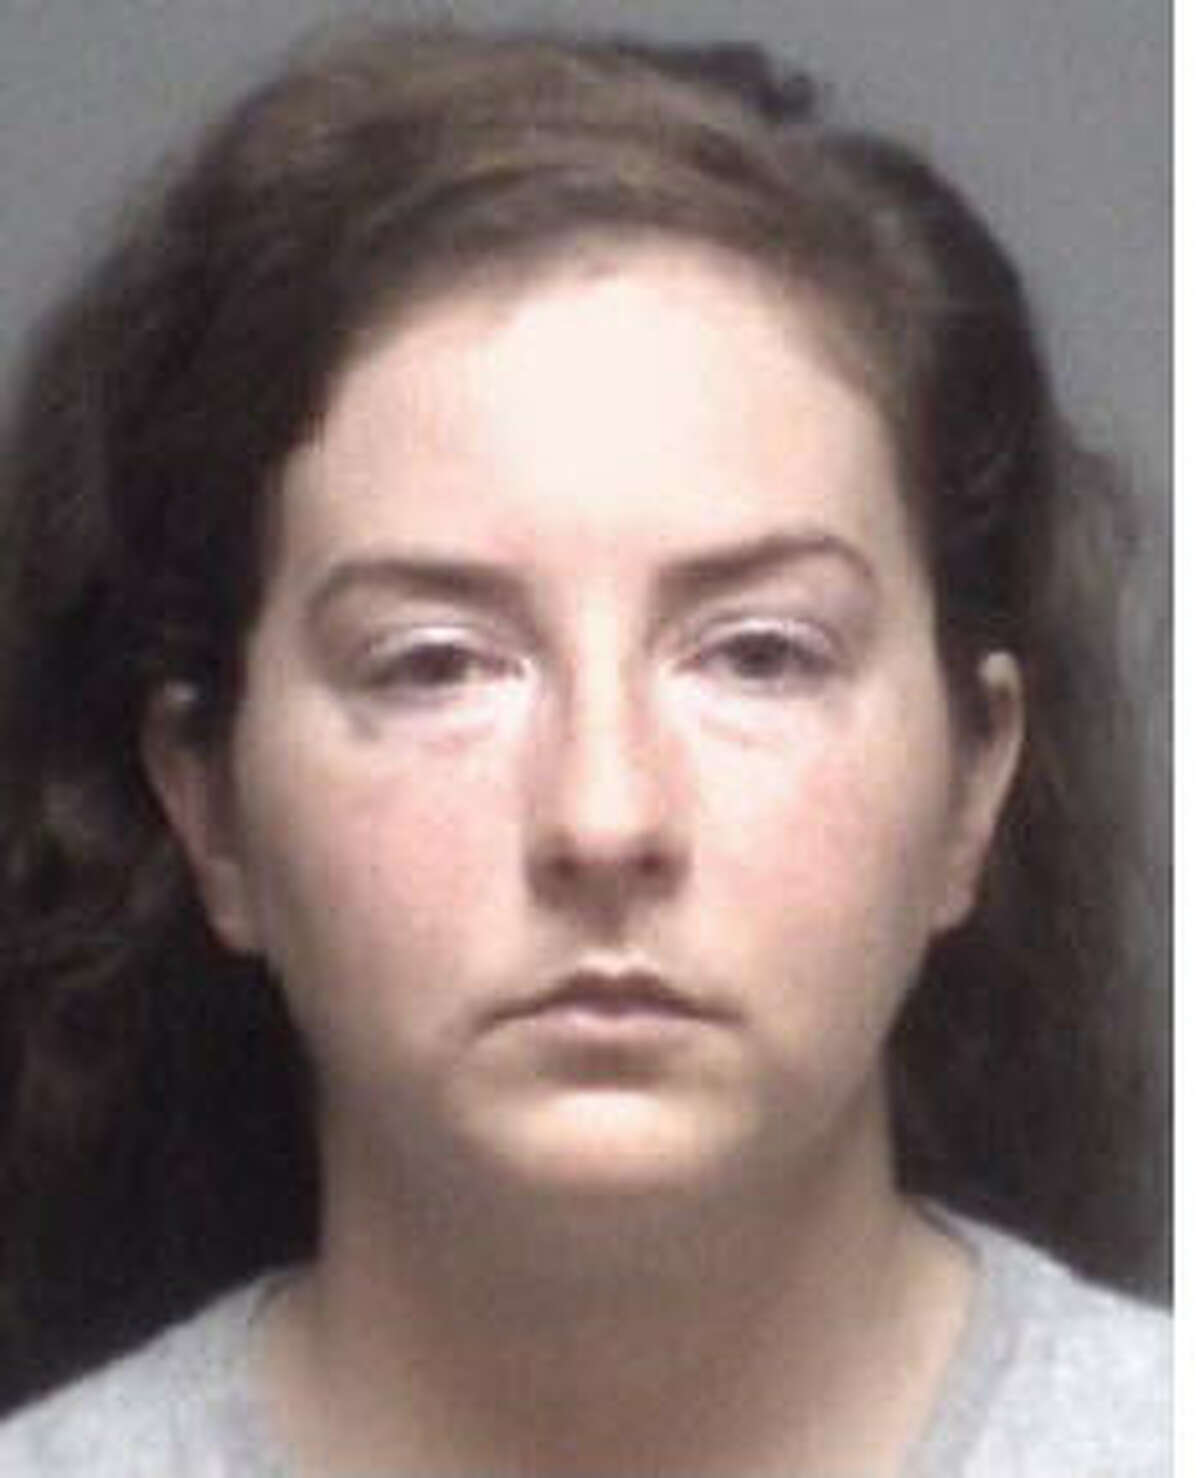 Rebecca Goerdel, 28, was arrested March 24, 2017, on a charge of having an improper relationship with a student.